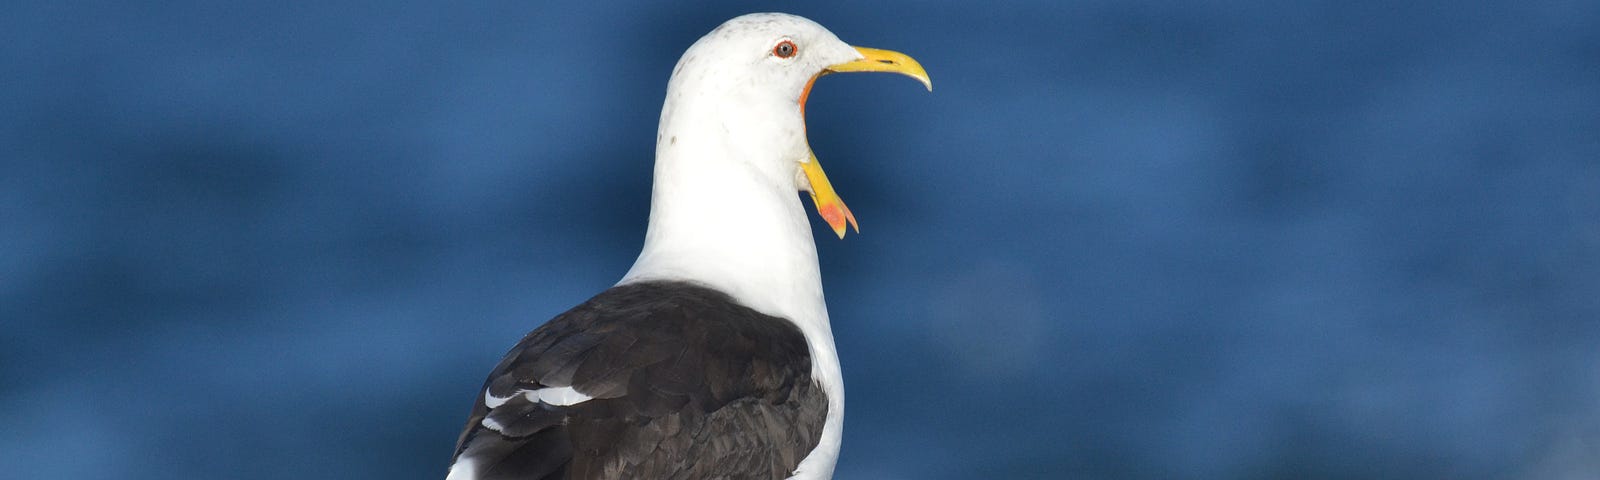 Seagull standing on shore with beak wide open